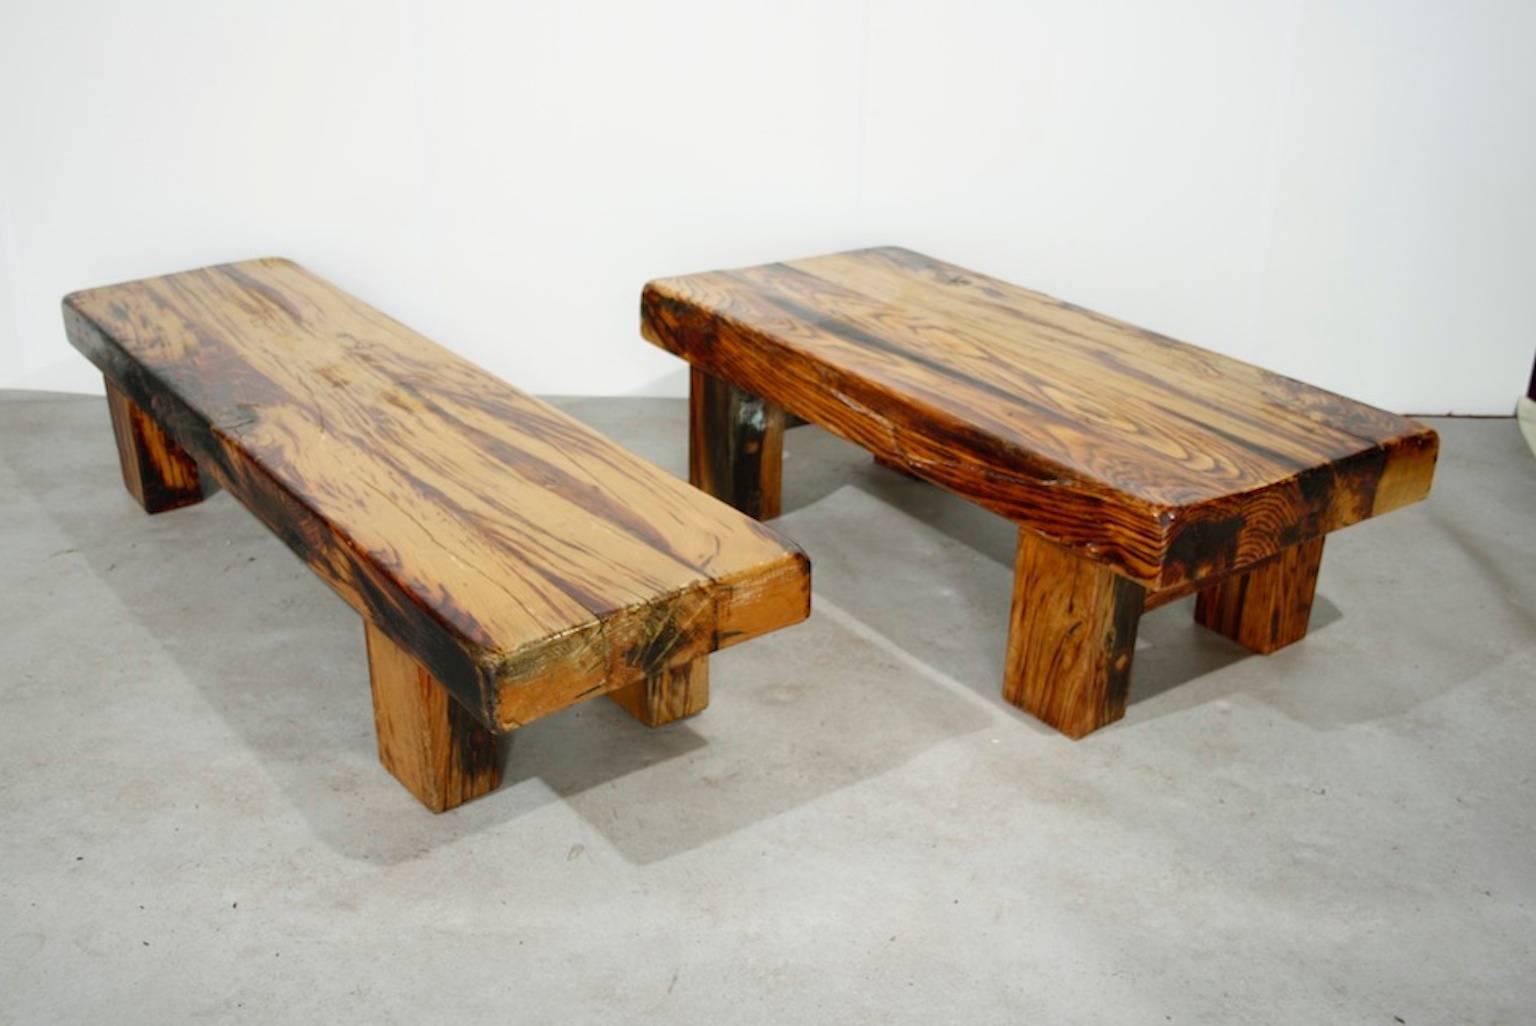 A beautiful set of an heavy wooden bench and coffee table.

These items are made of solid lacquered wood a have a very nice grain.

They remind us somewhat to the works of Perriand.

Measures: Bench: 160 cm long, 42 cm deep and 30 cm high
Side